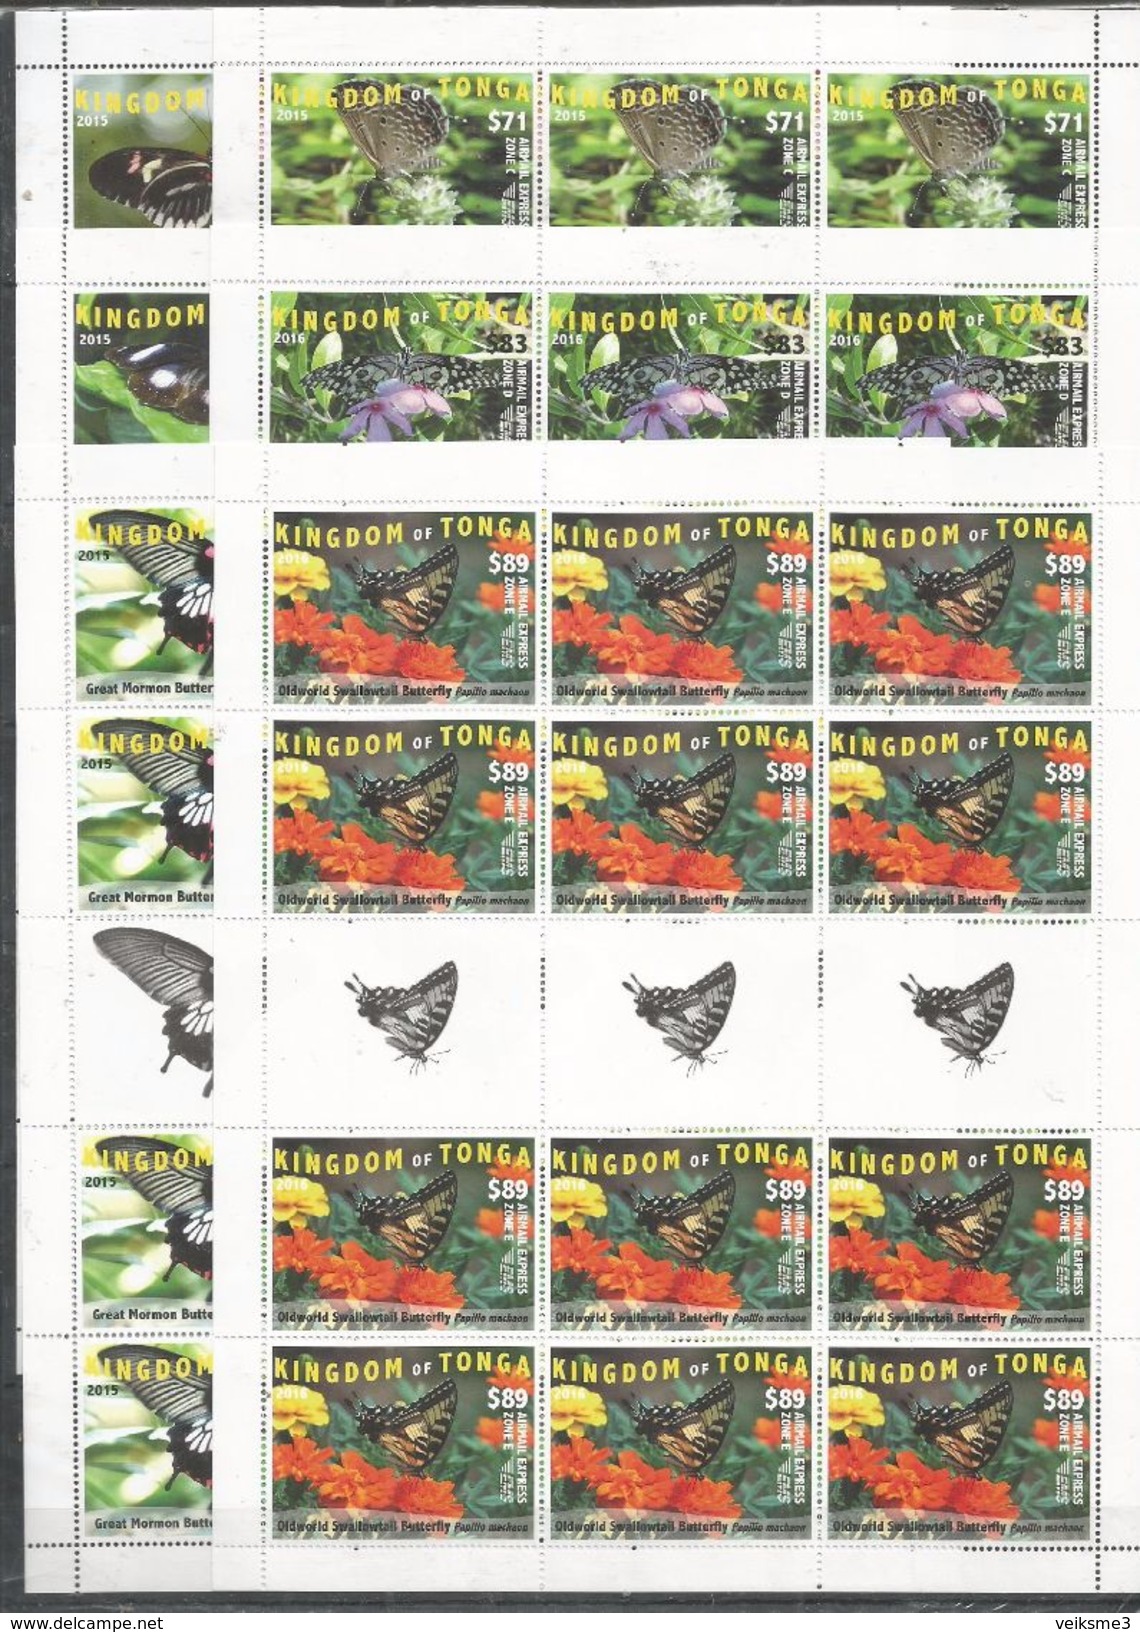 12x KINGDOM OF TONGA - MNH - Animals - Insects - Butterflies 2015 - 2016 - Schmetterlinge